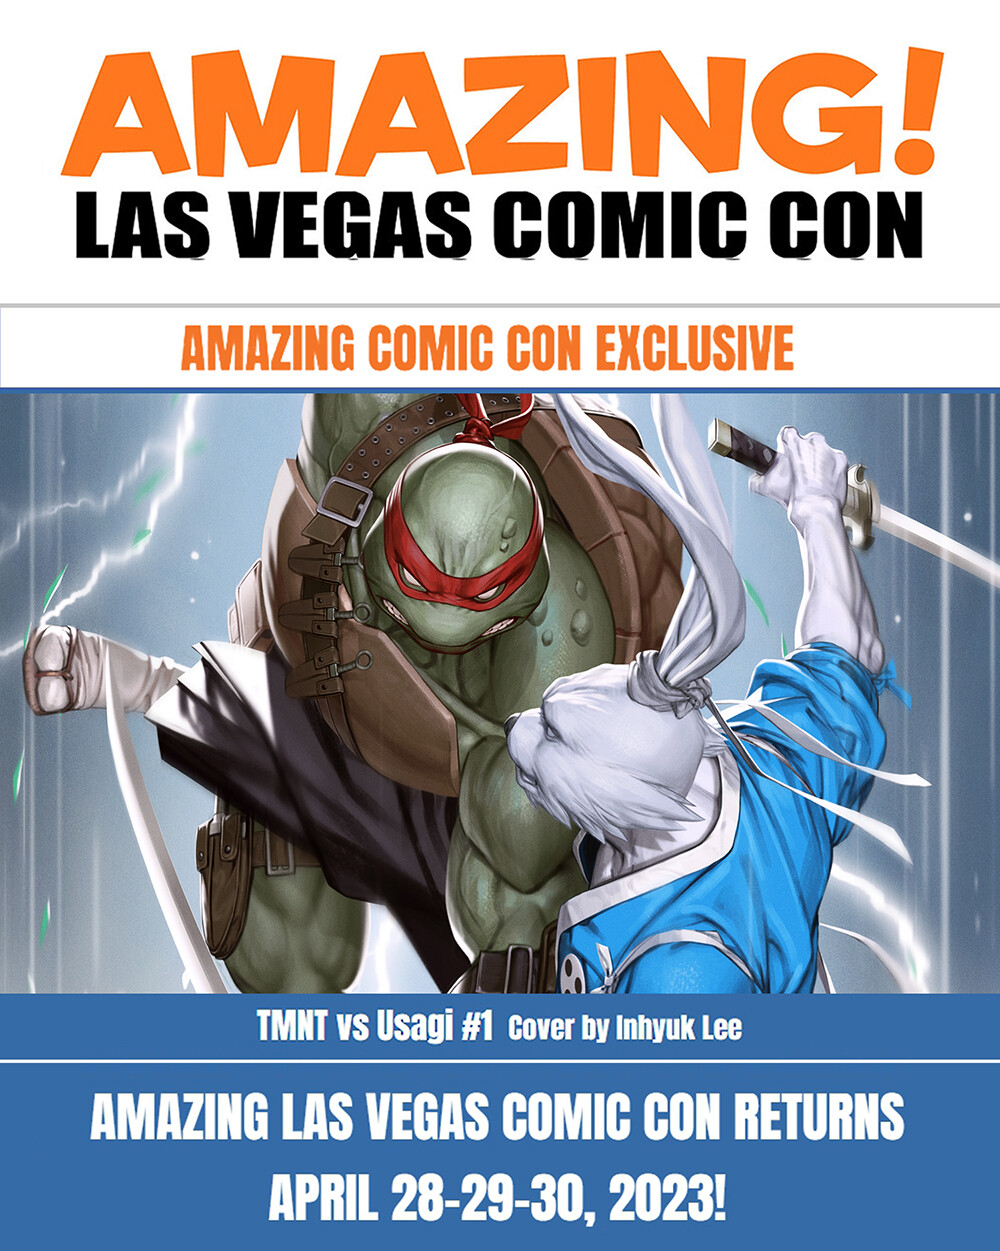 https://www.amazingcomiccon.com/single-post/amazing-las-vegas-comic-con-new-special-branded-products-only-available-here